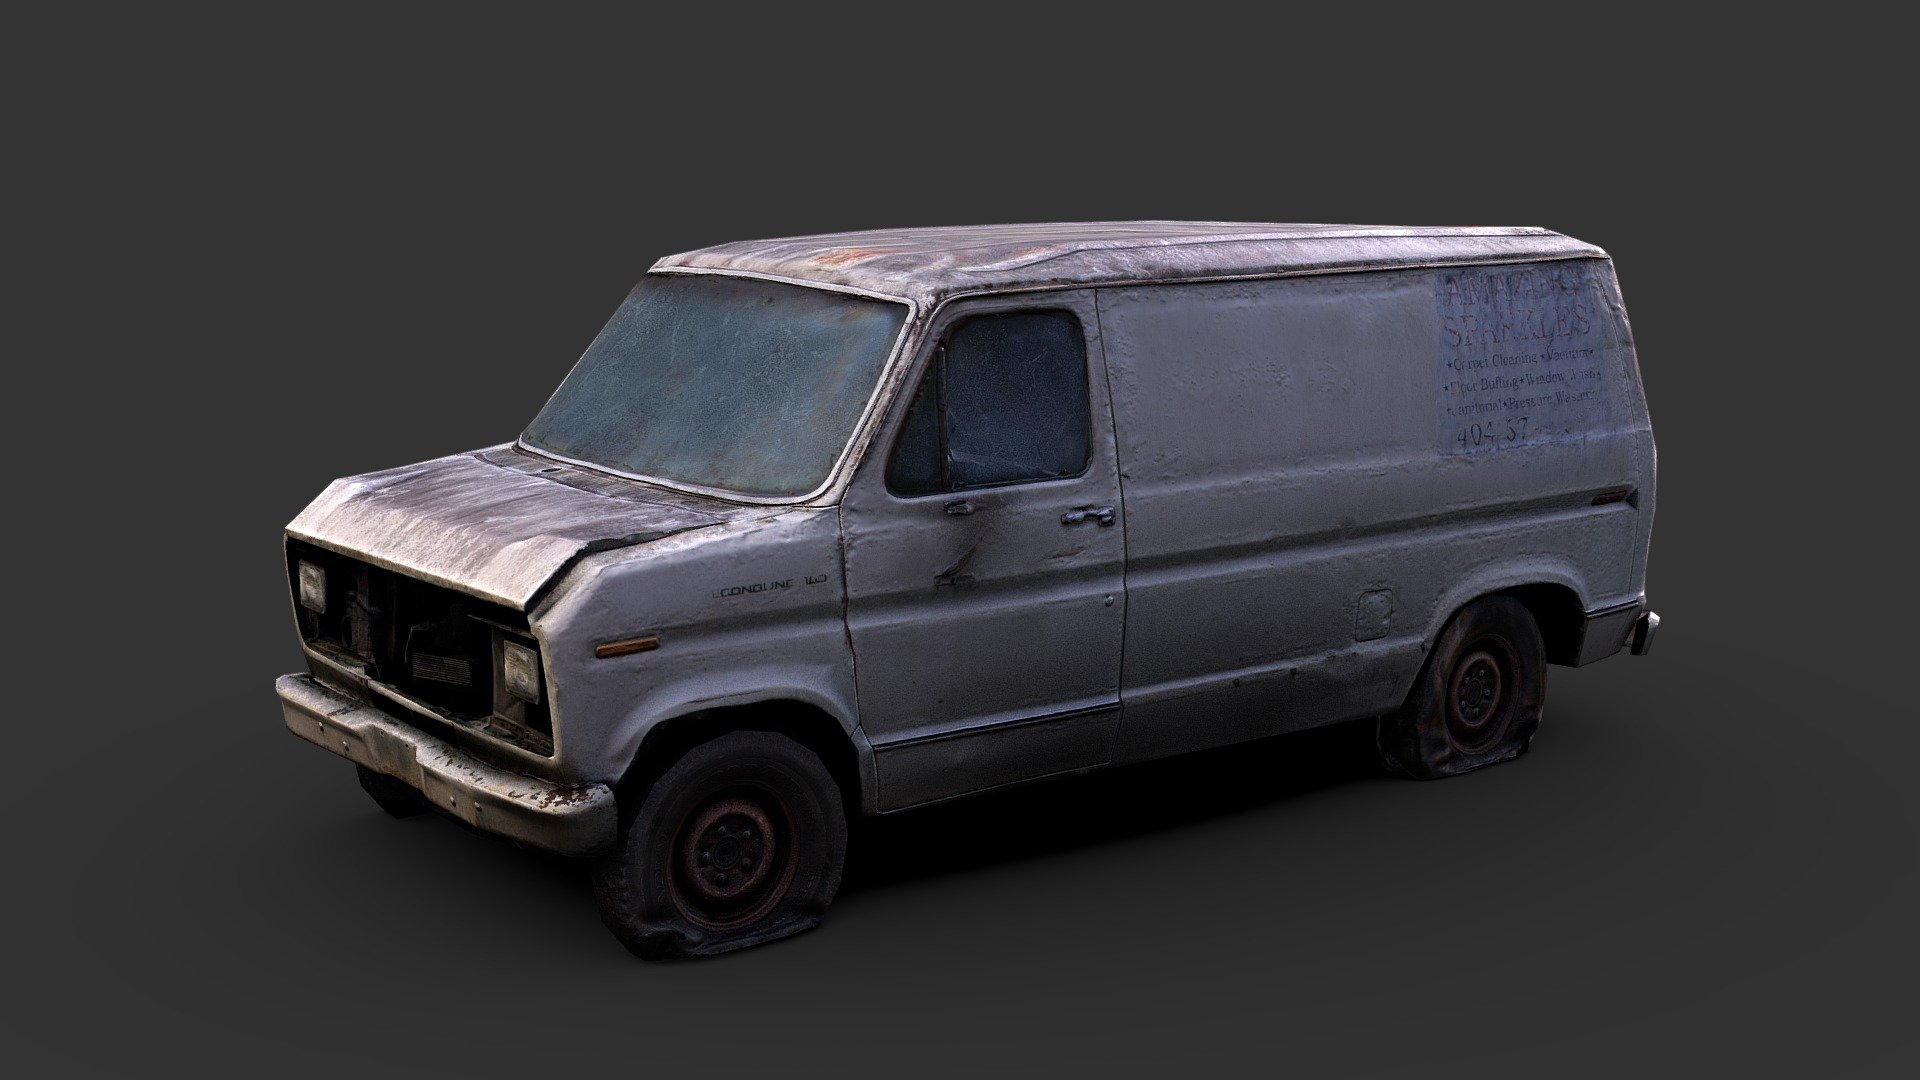 The van template for the Graffiti Challenge, I included versions of the textures with and without shading, and the shading without the texture, just in case you want to apply the shading to your graffiti!

Made in 3DSMax, Realitycapture and Substance Painter - Graffiti Van Template - Download Free 3D model by Renafox (@kryik1023) 3d model